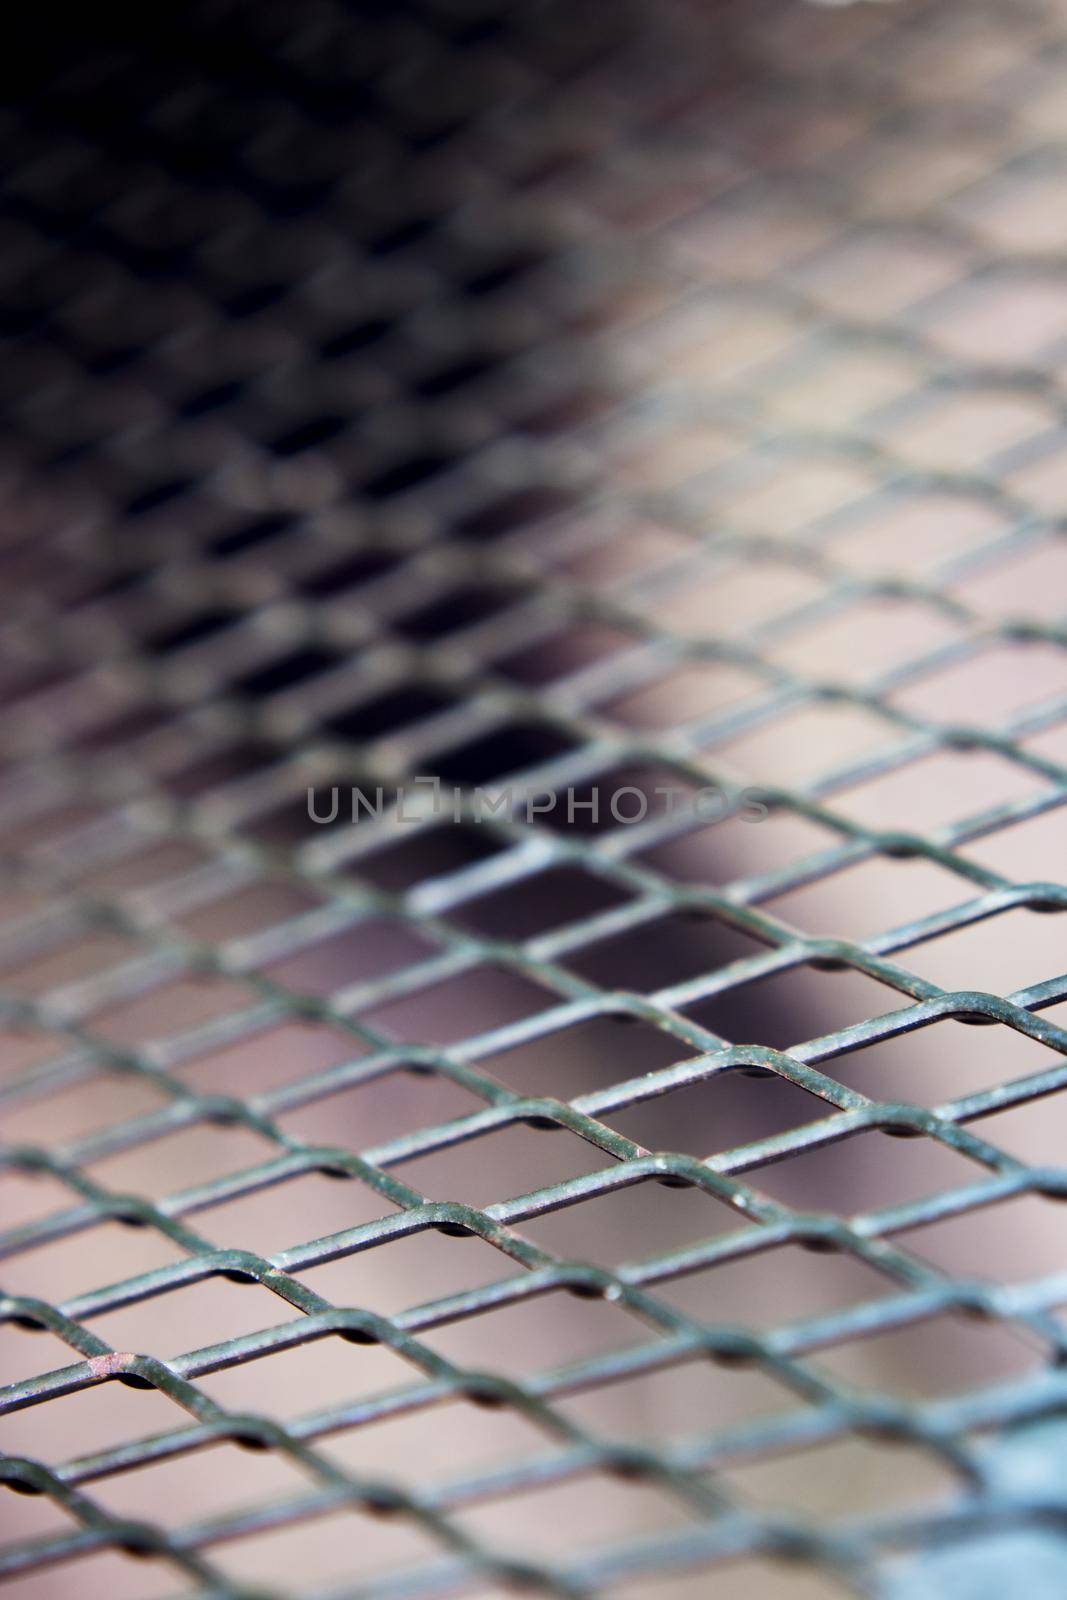 Grating with defocused rhombus shaped background. No people